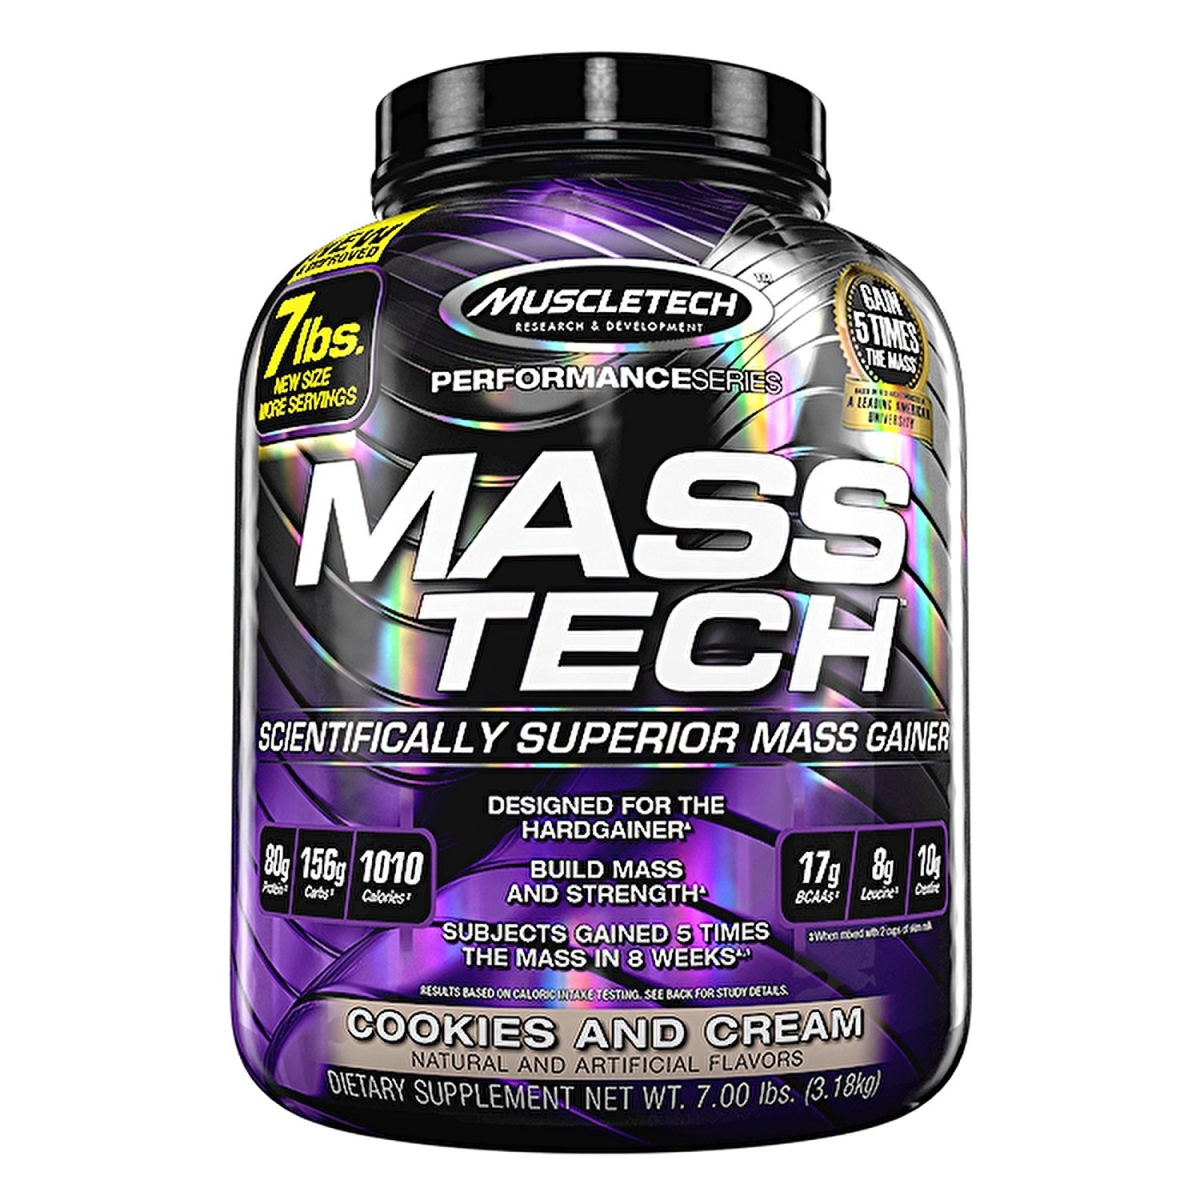 Europa Sports Products 800585 7 Lbs Mass Tech Cookies & Cream